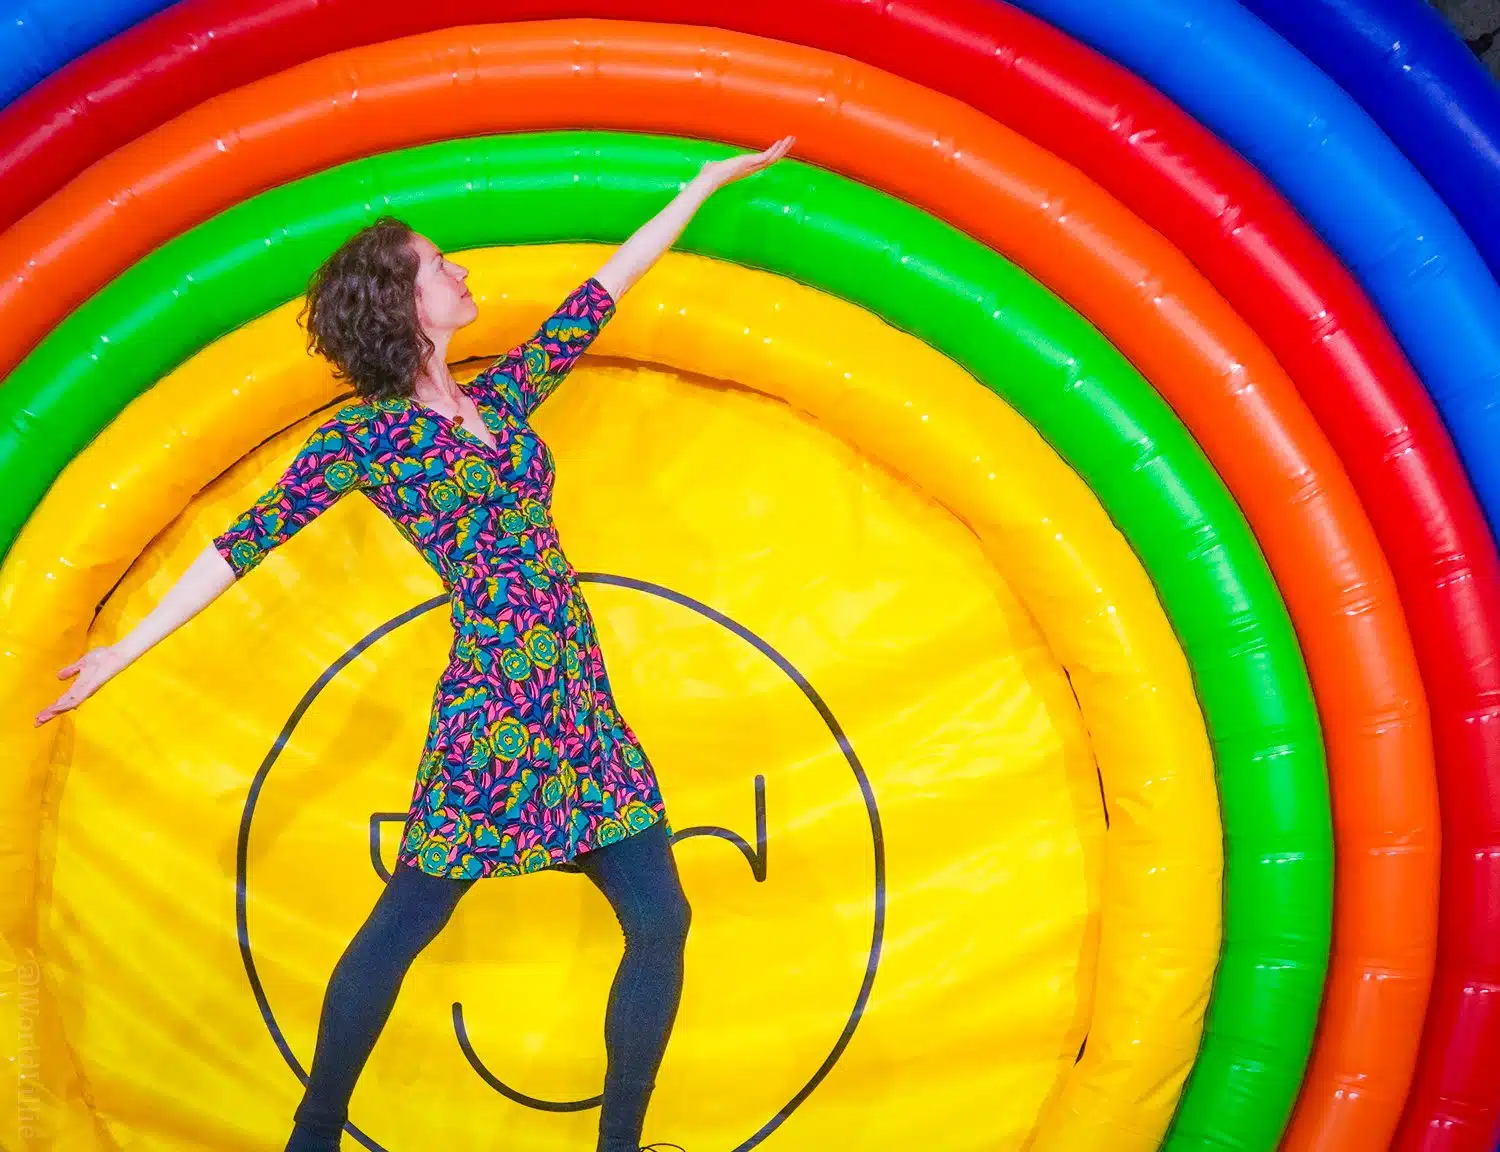 The iconic Happy Place bouncy rainbow.